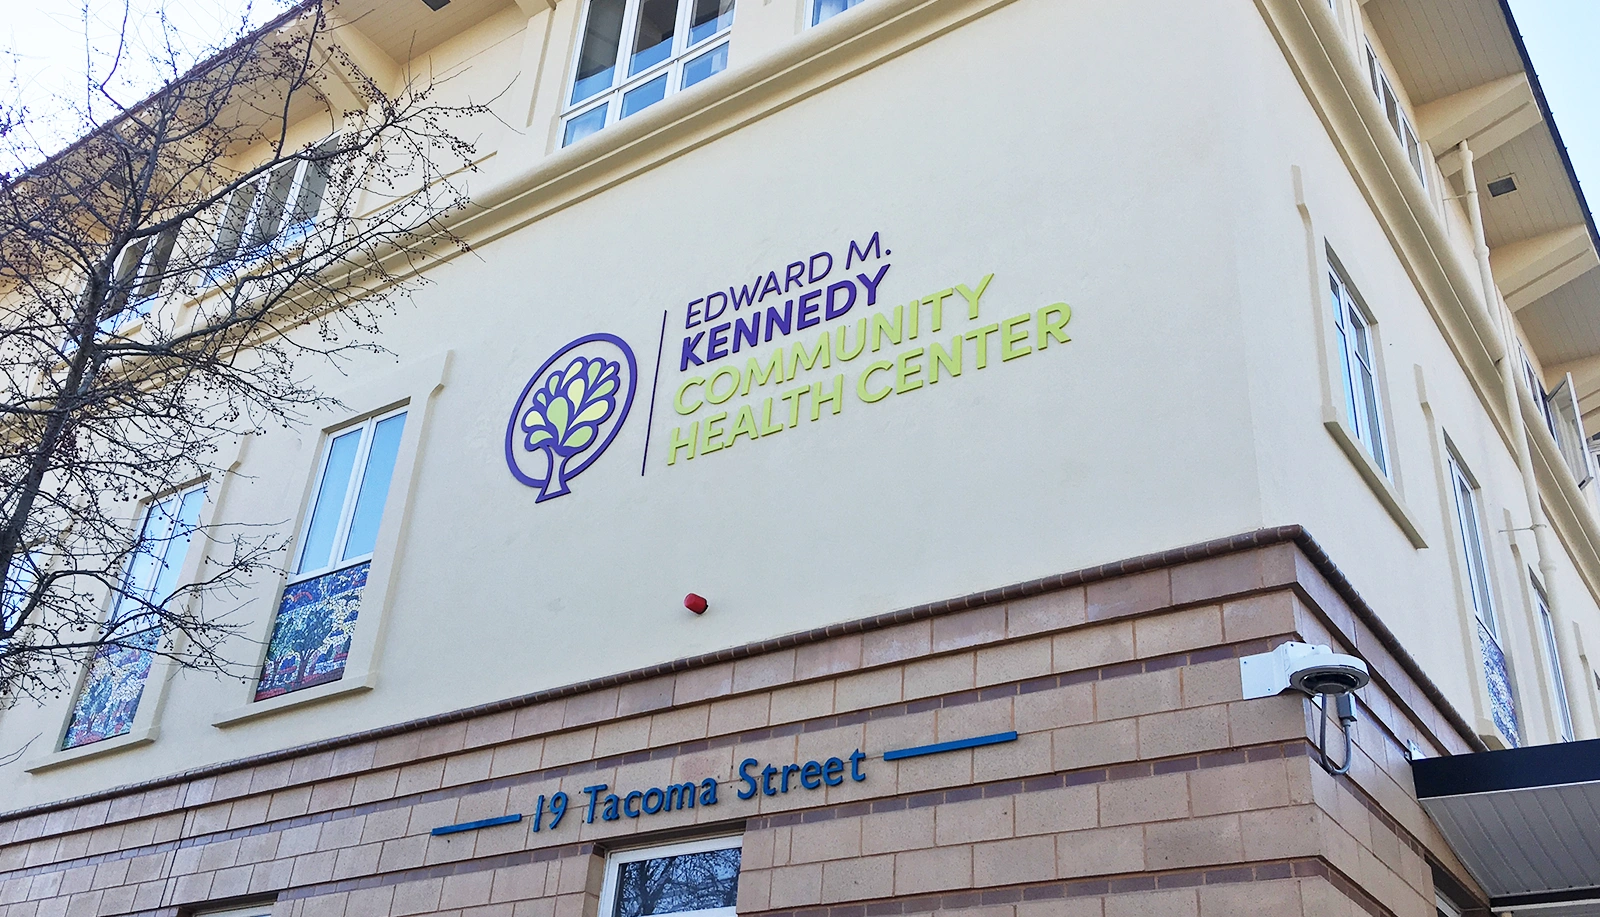 MAVEN Project brings specialty care to provider fingertips at Kennedy Community Health